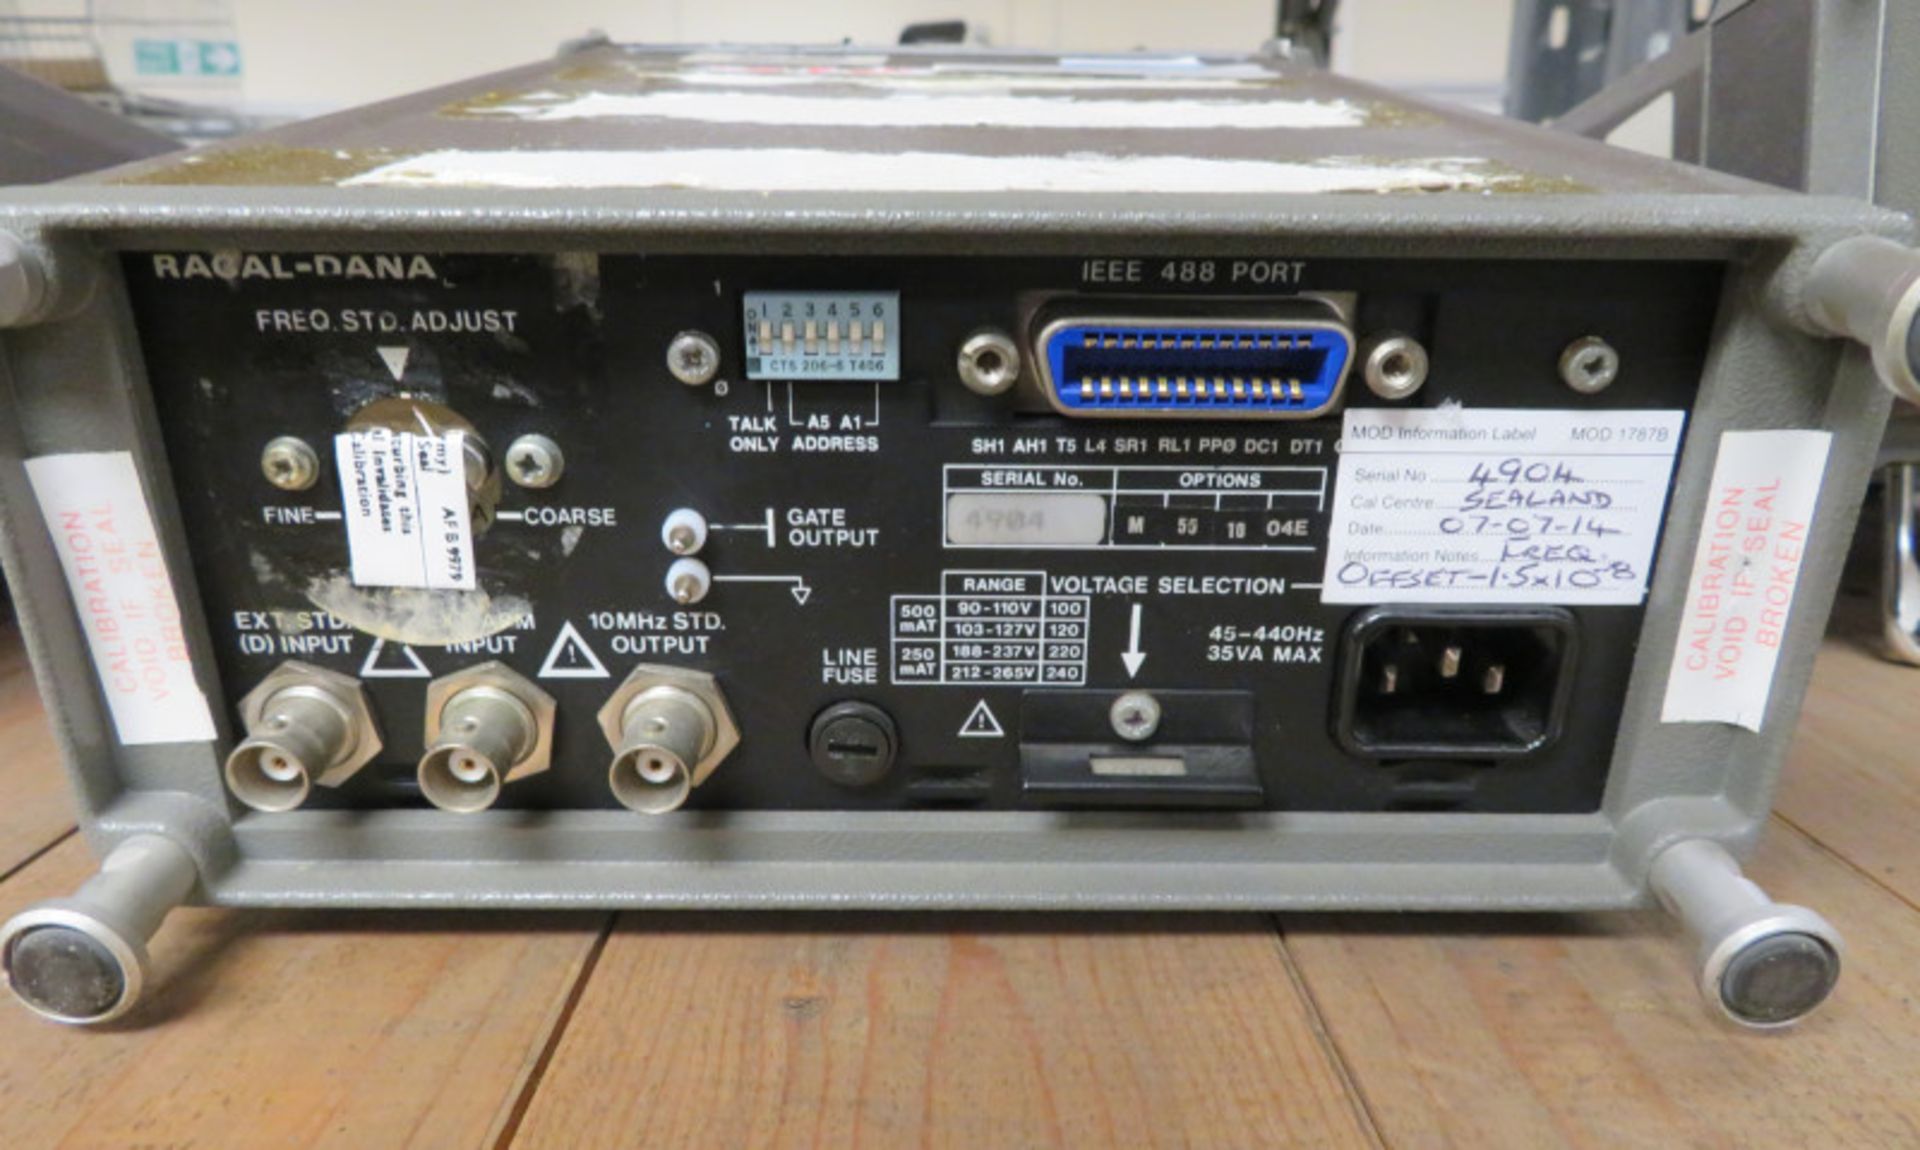 Racal-Dana 1998 Frequency Counter - Missing Power Button - Image 3 of 3